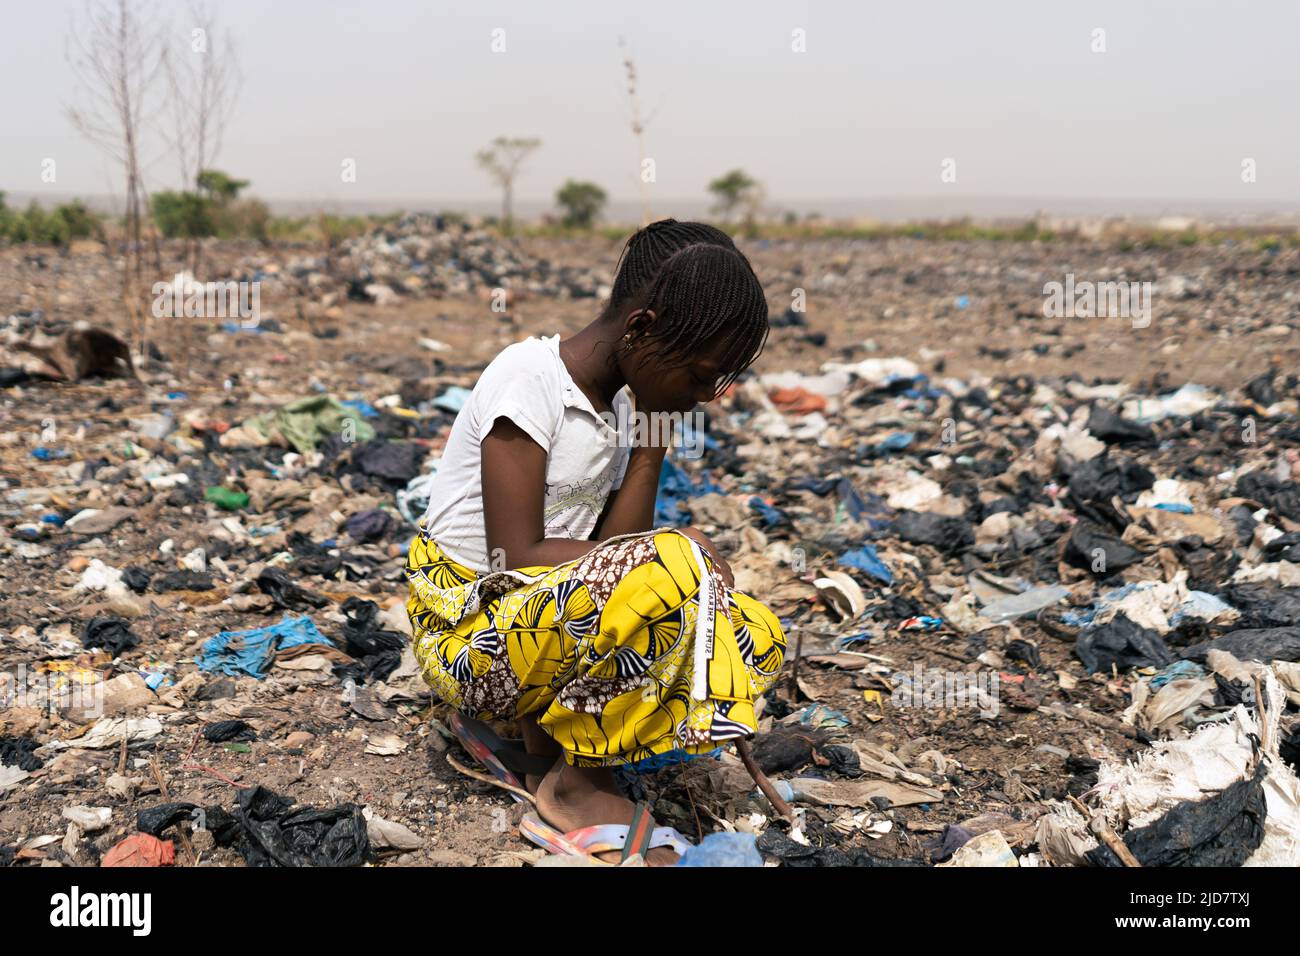 Exhausted little African girl kneeling in a garbage dump where she is forced to search for reusable material; child labor and exploitation Stock Photo